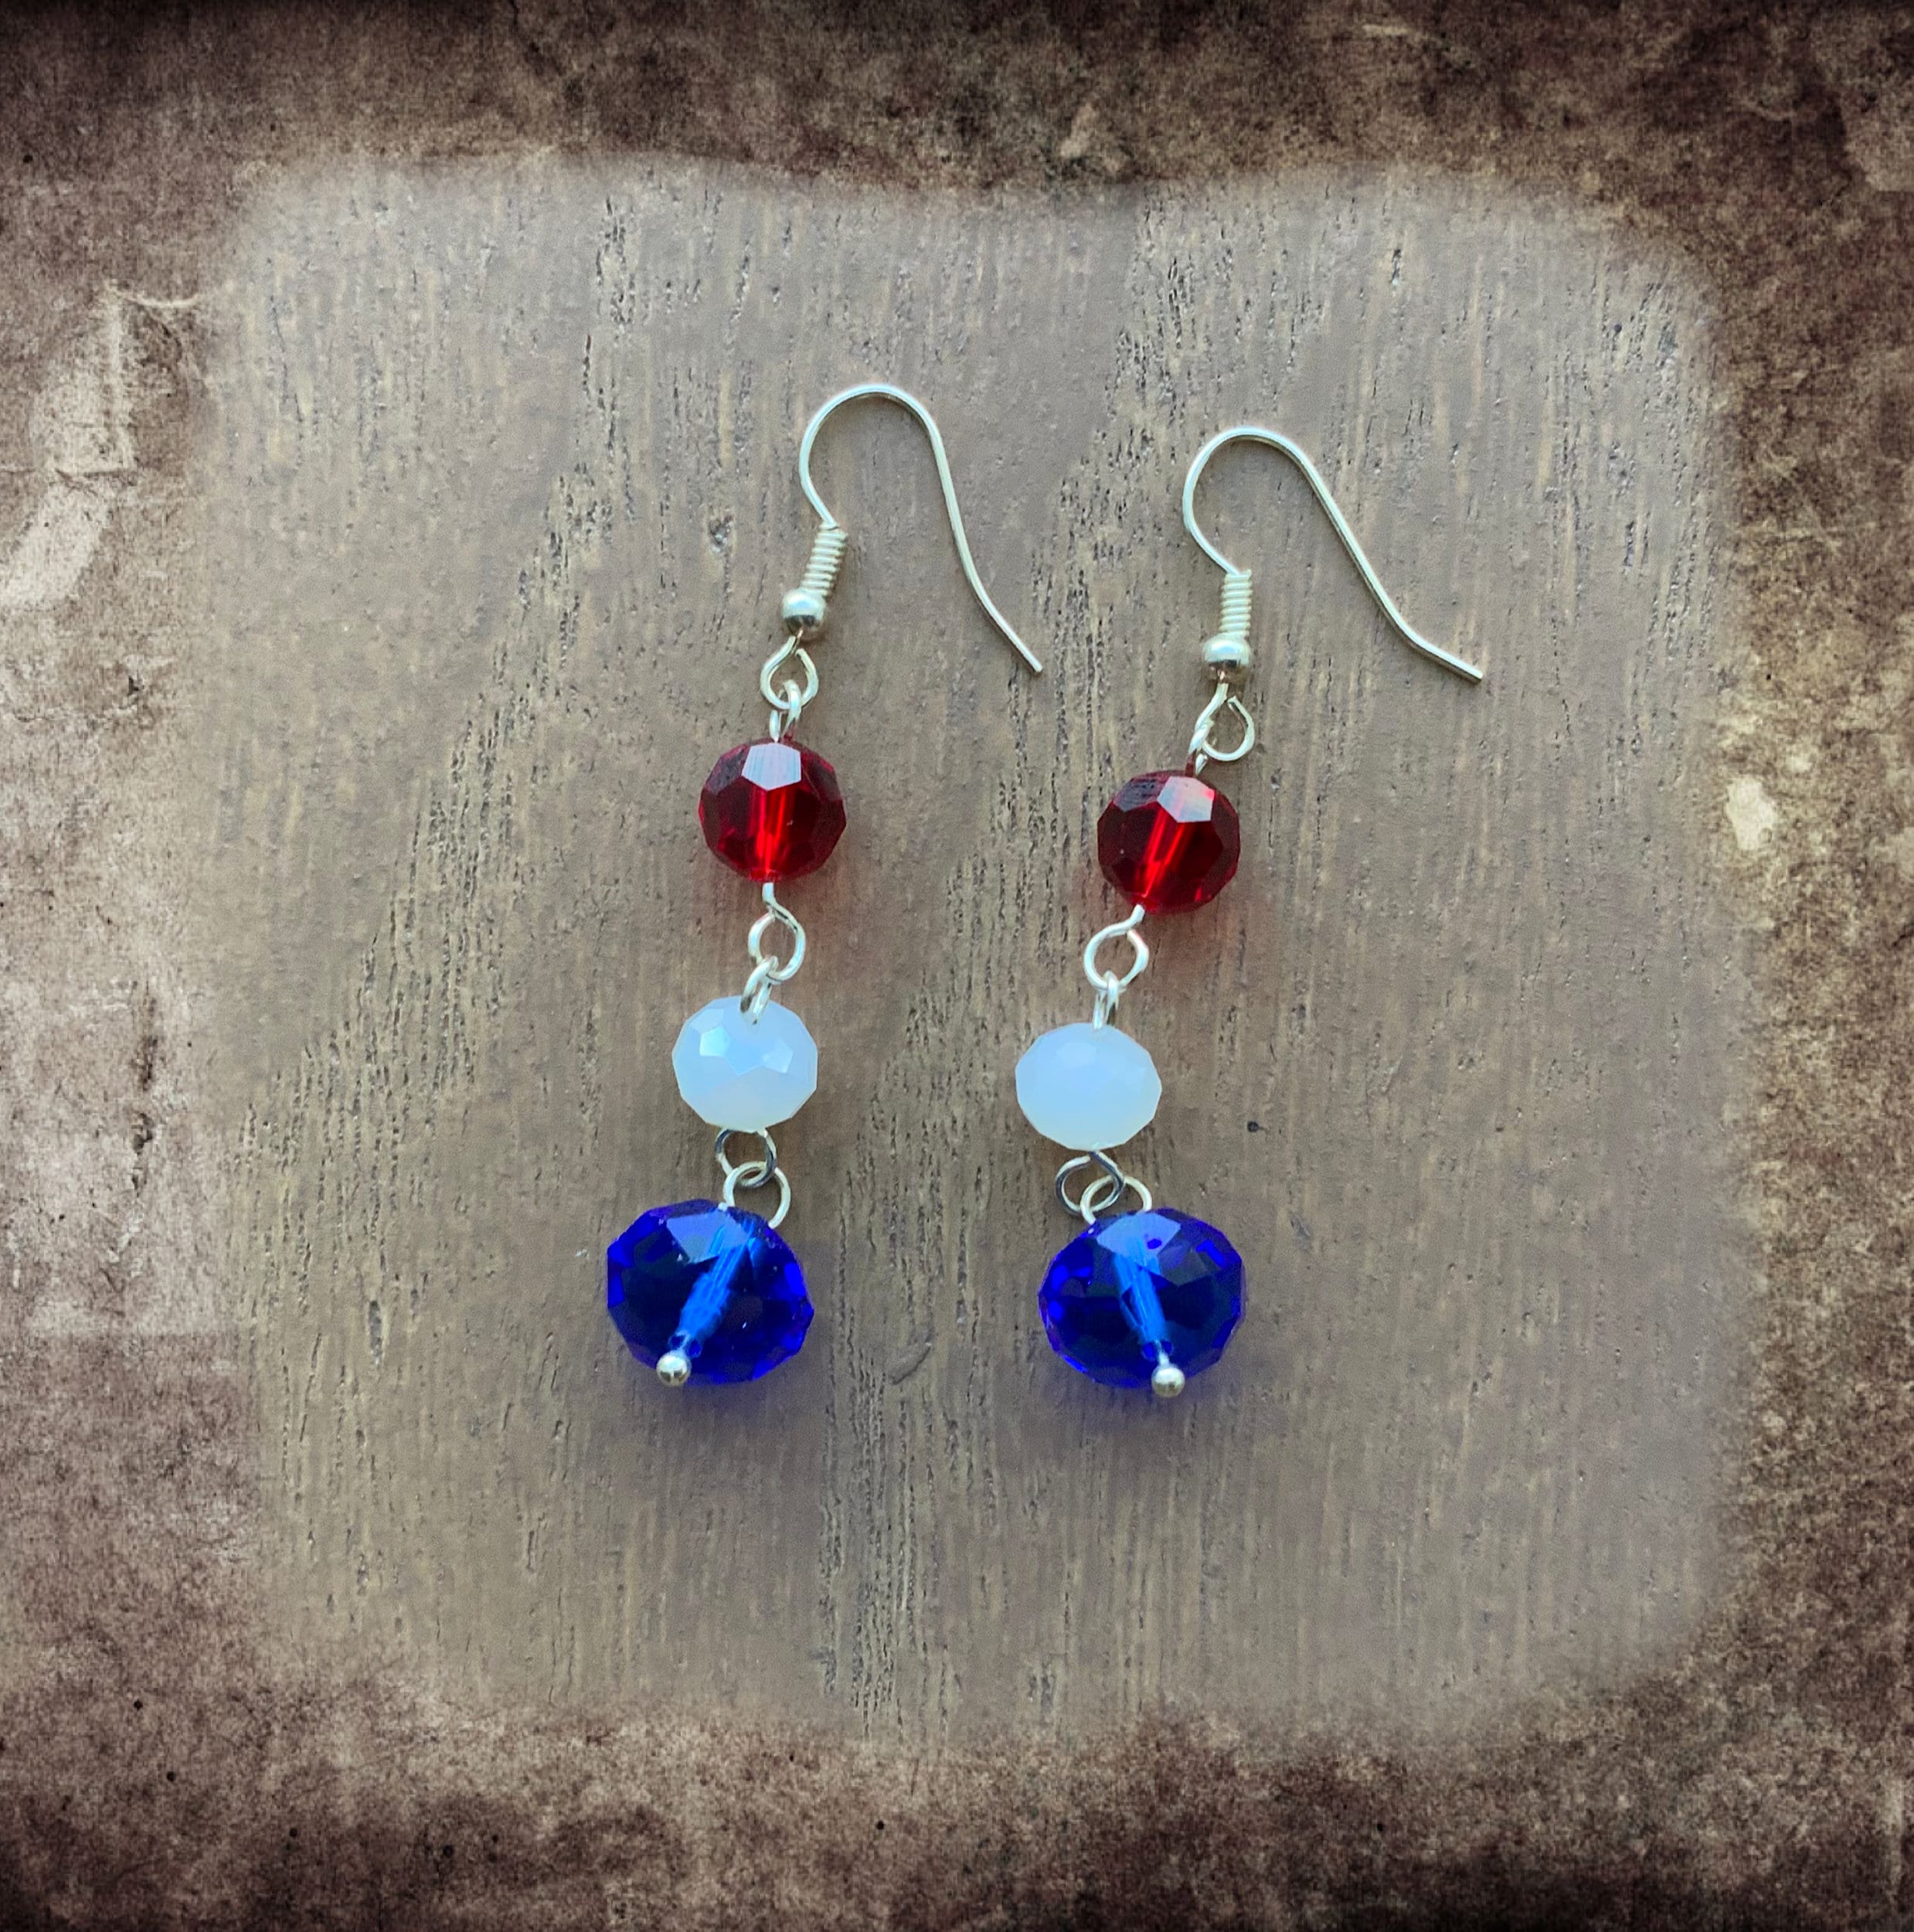 Patriotic earrings 4rth of July, red white and blue earrings Memorial Day jewelry American flag earrings